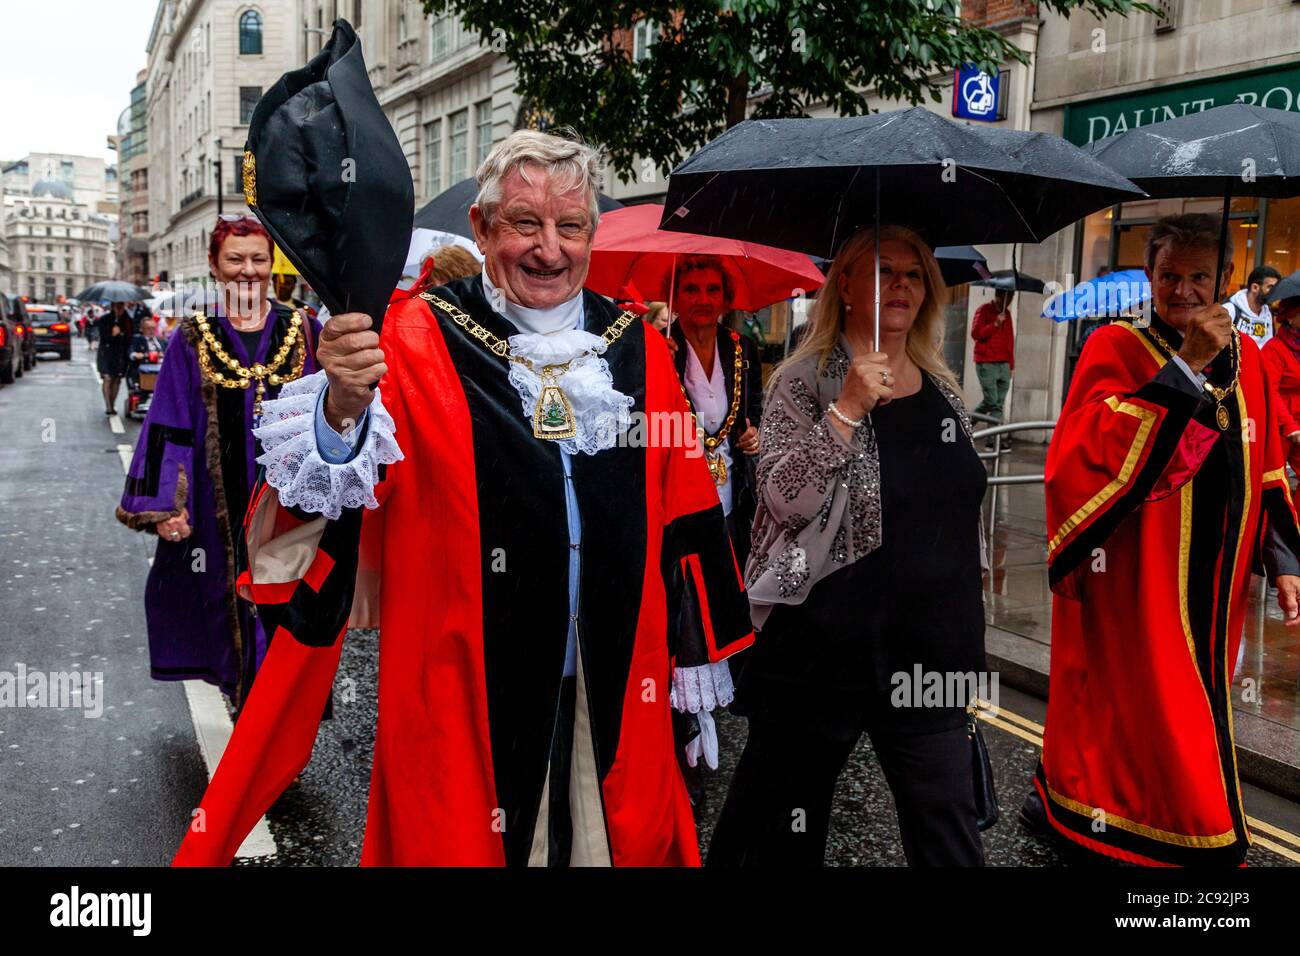 London Mayors Make Their Way To The Bow Bells Church For The Annual Pearly Kings and Queens Harvest Festival Service, London, England. Stock Photo